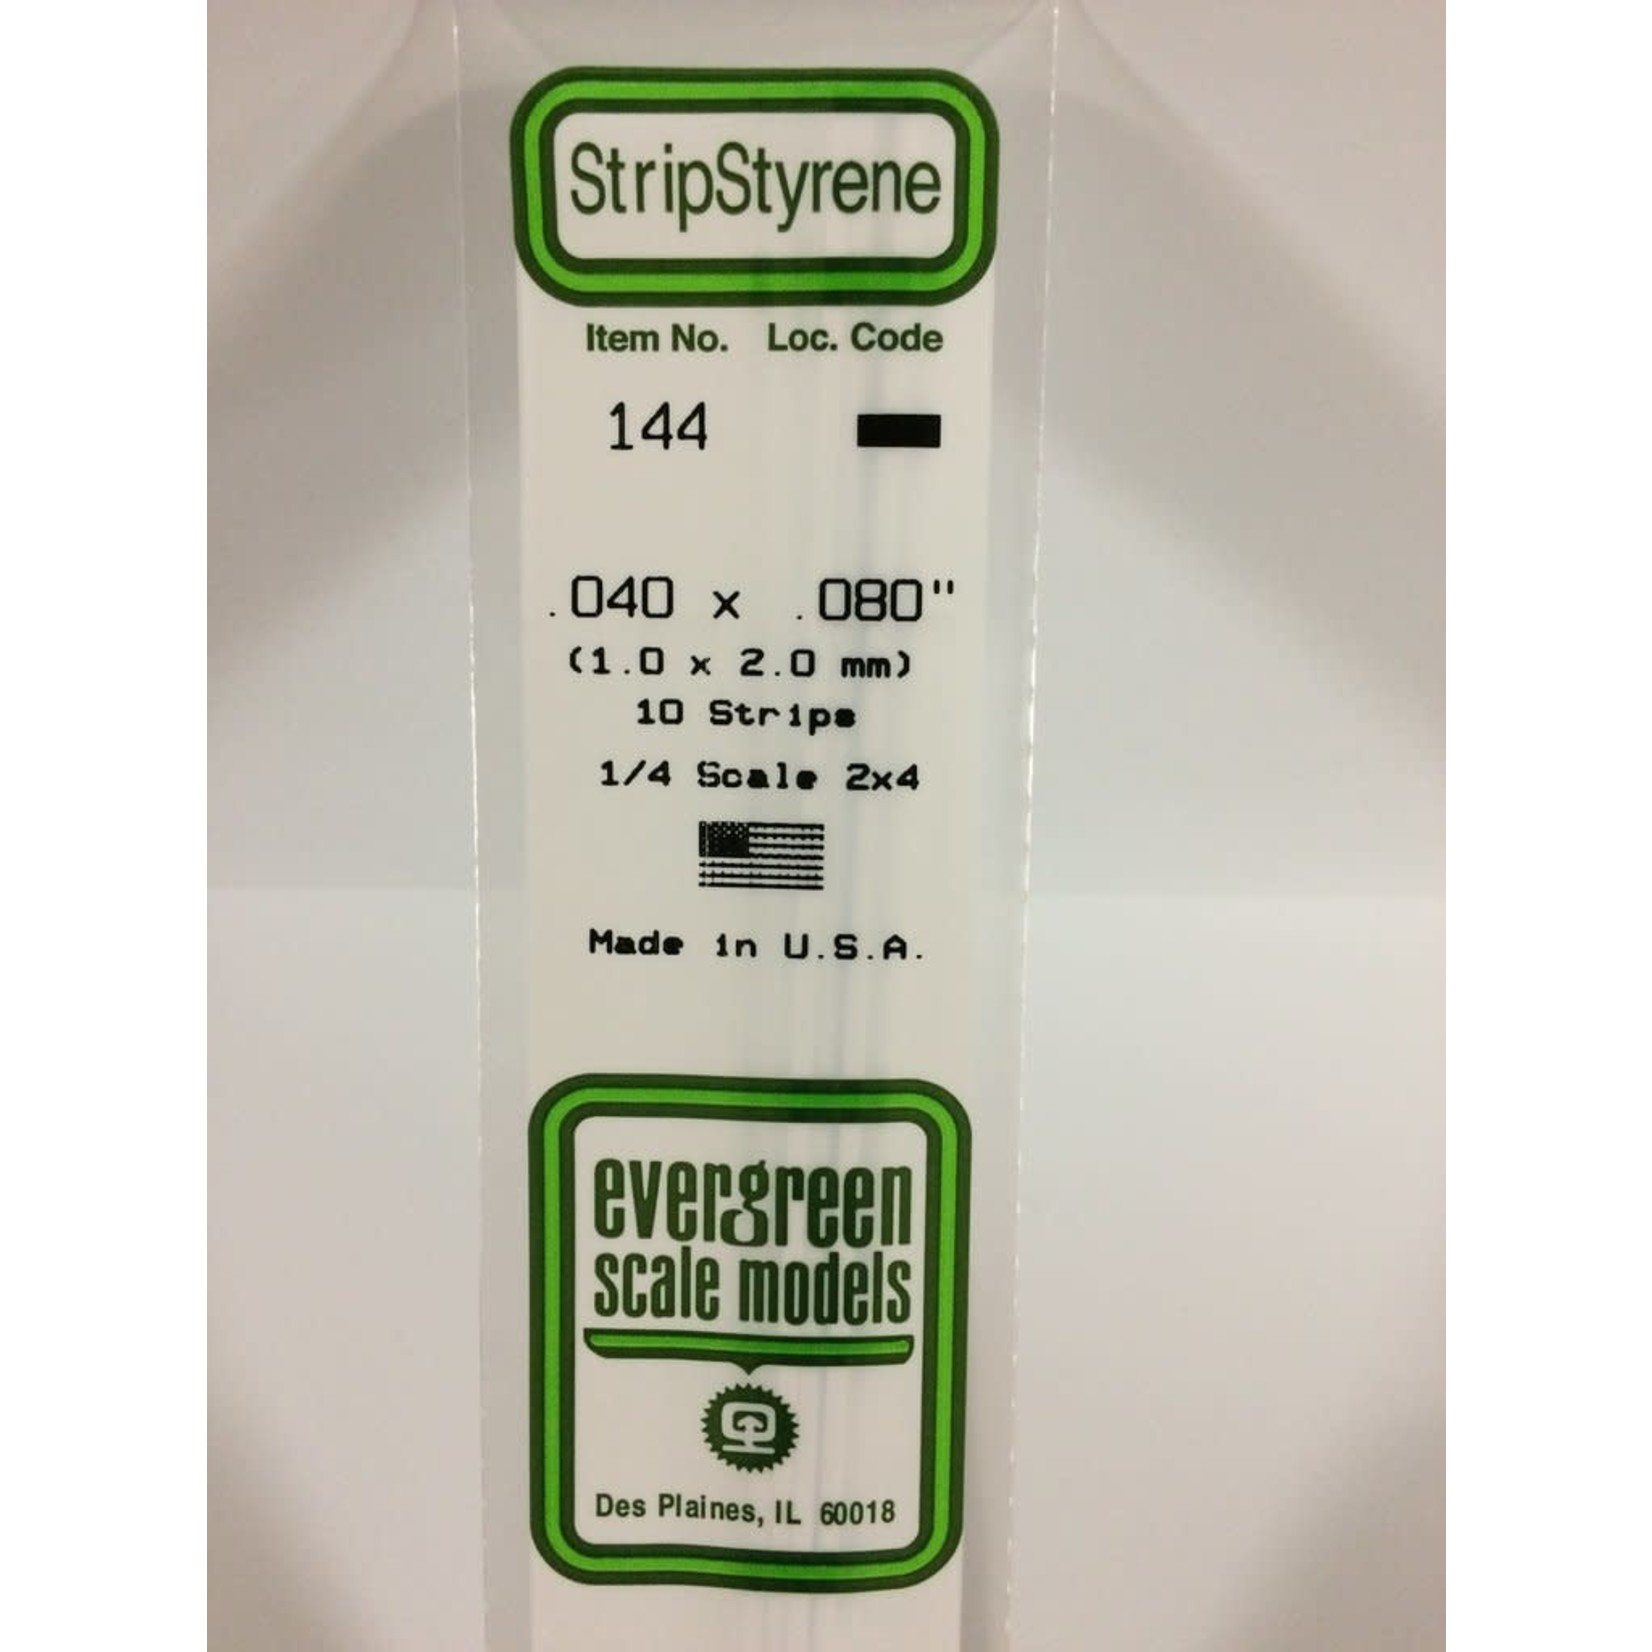 Evergreen Scale Models Evergreen 144 - .040" X .080" OPAQUE WHITE POLYSTYRENE STRIP